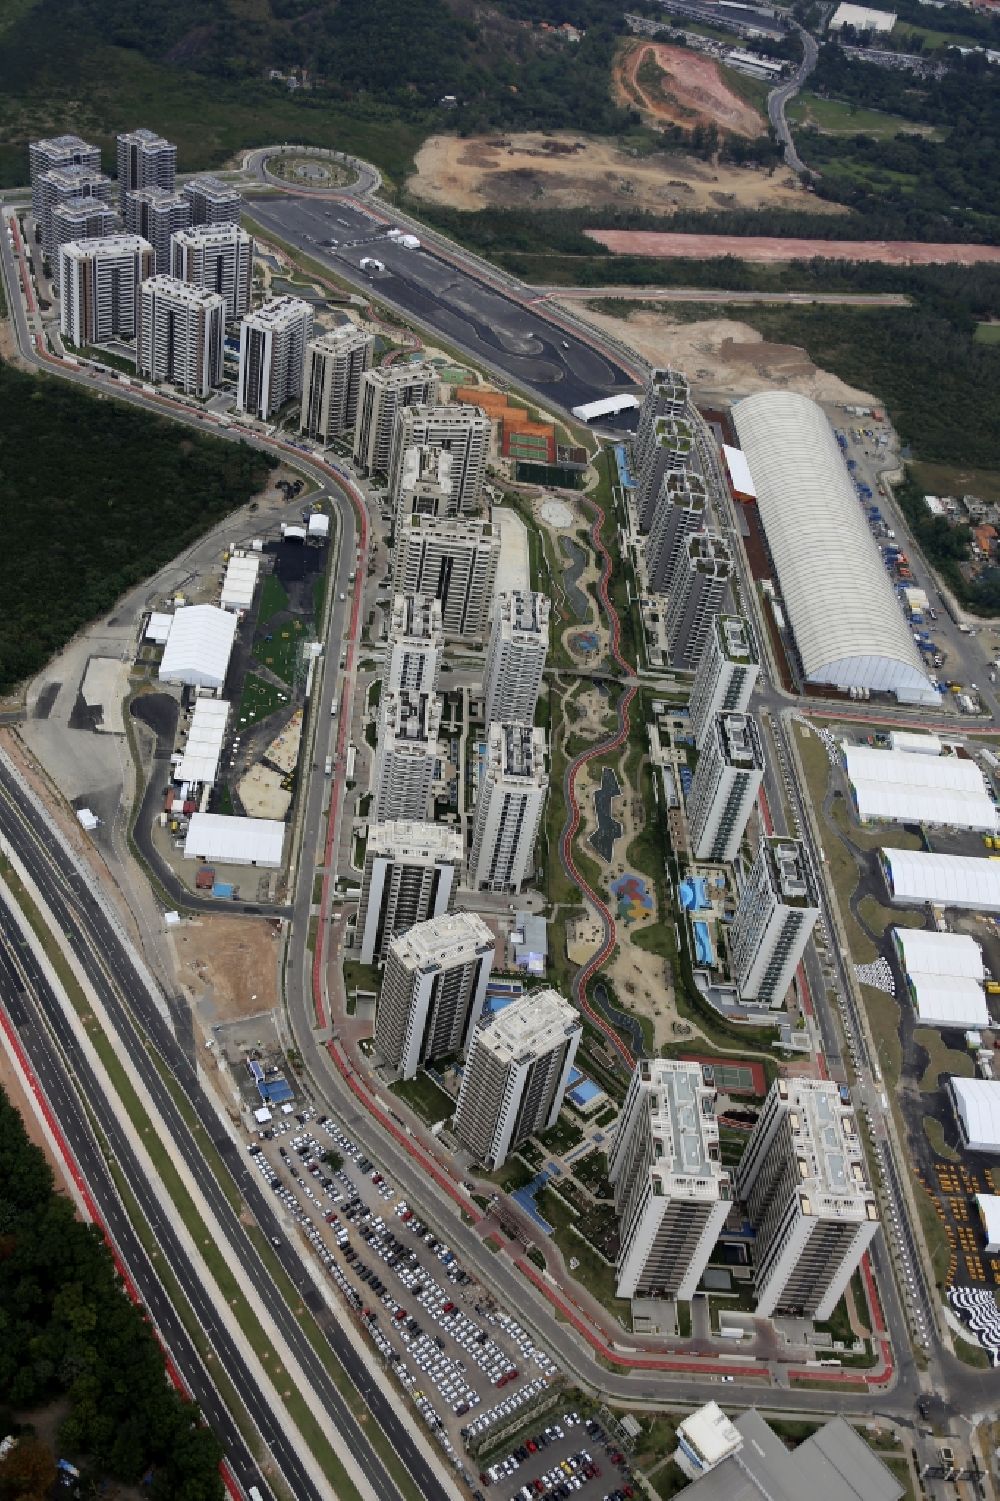 Aerial image Rio de Janeiro - Skyscrapers in the residential area of industrially manufactured settlement for accommodation of athletes before the Summer Games of the Games of the XXXI. Olympics in Rio de Janeiro in Rio de Janeiro, Brazil